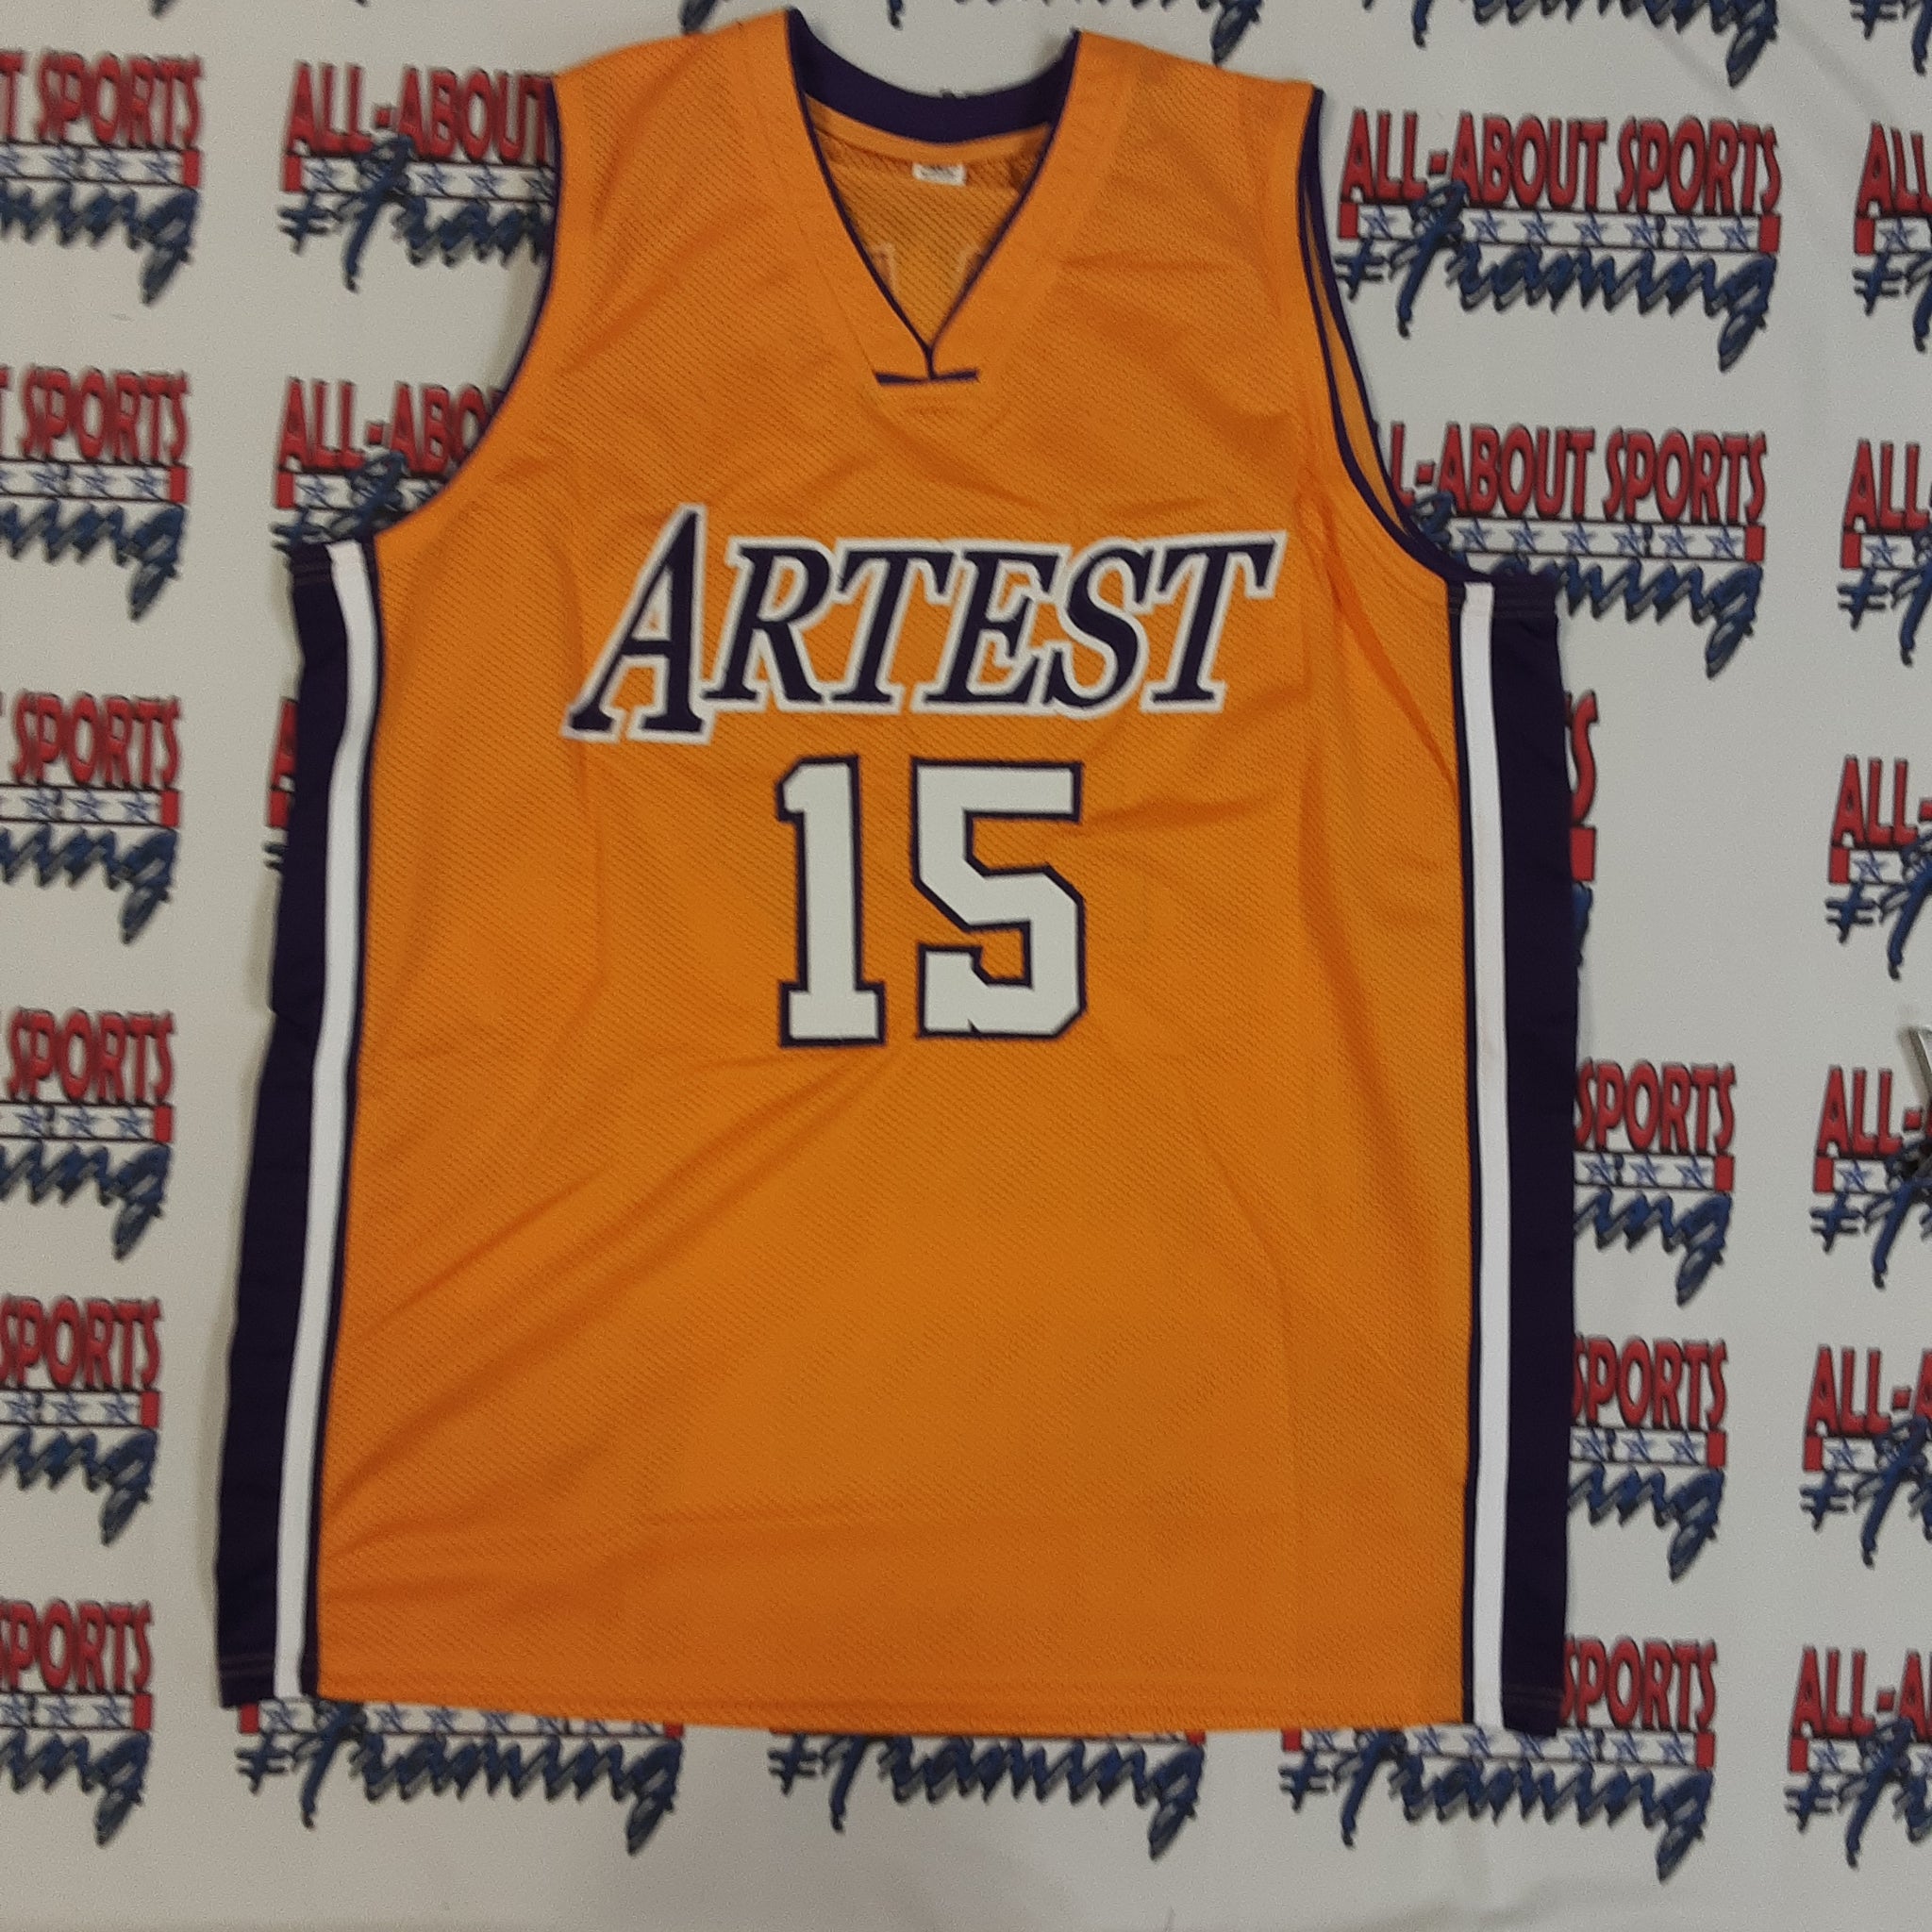 artest lakers jersey